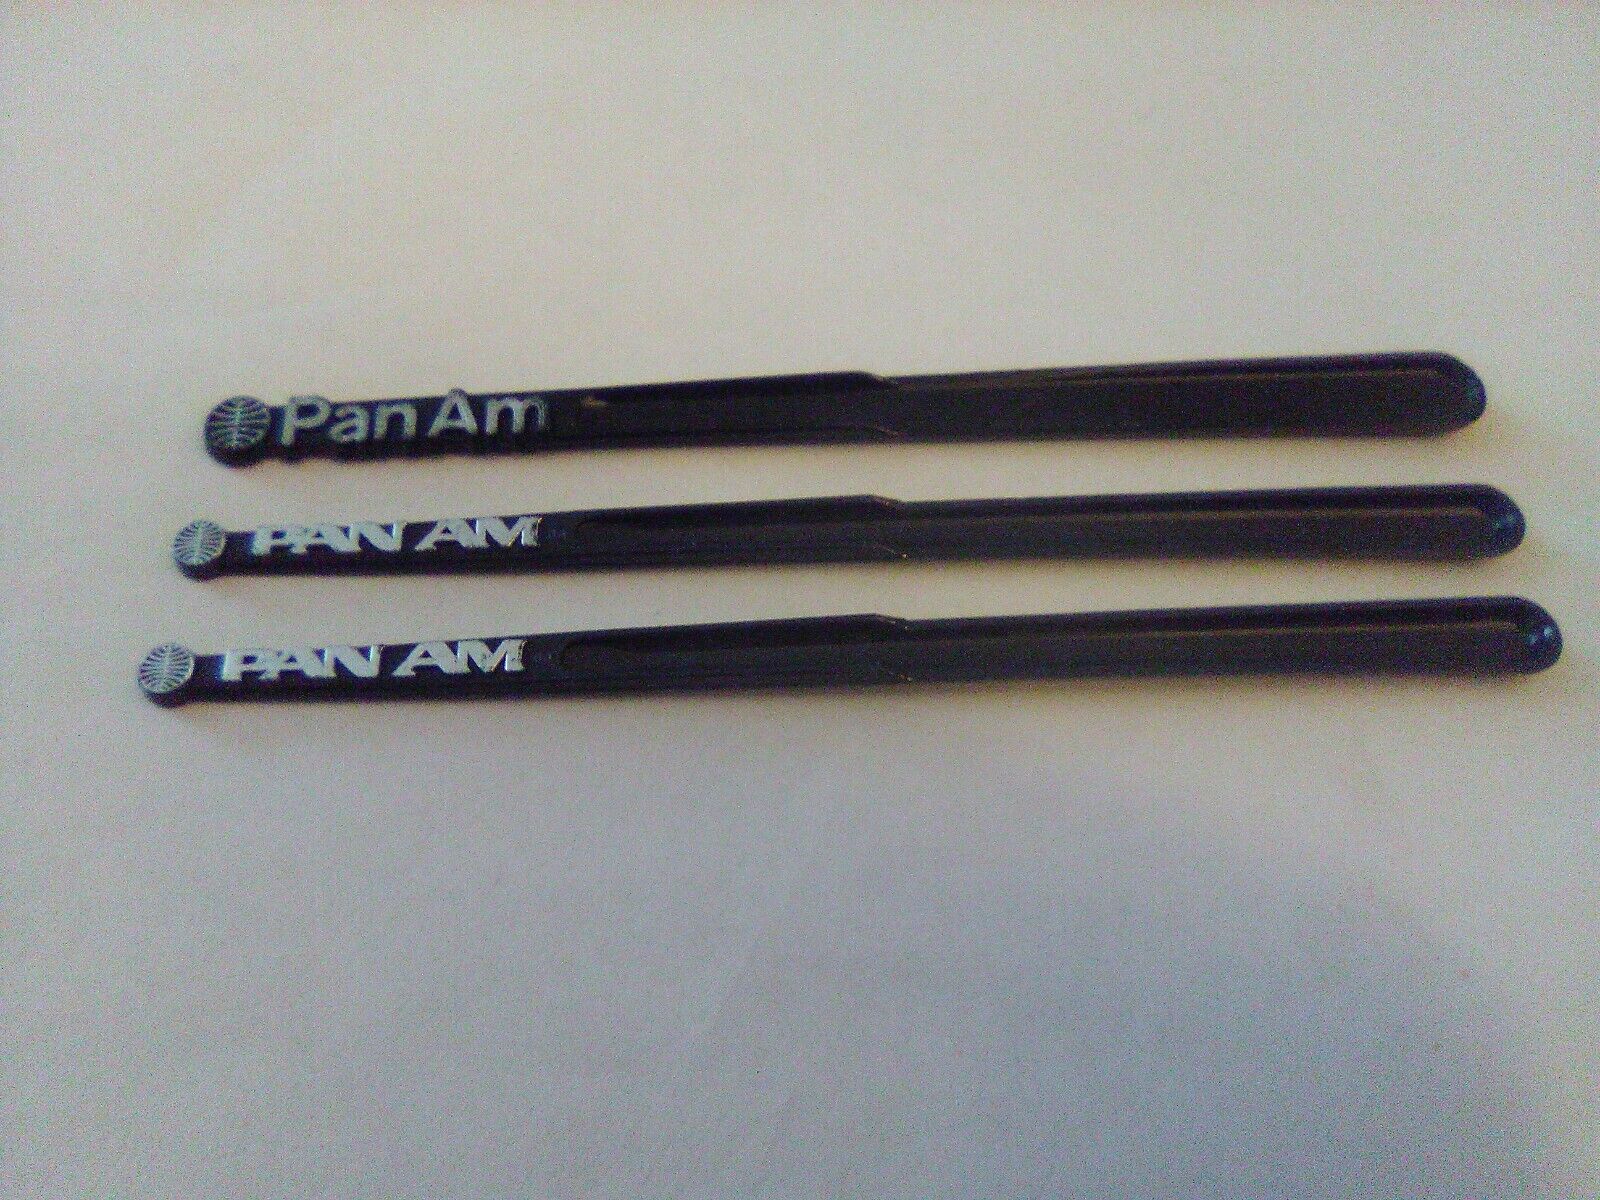 3 PAN AM Airlines Drink Stirrers Swizzle Sticks 1970s 2 fonts Black & Silver